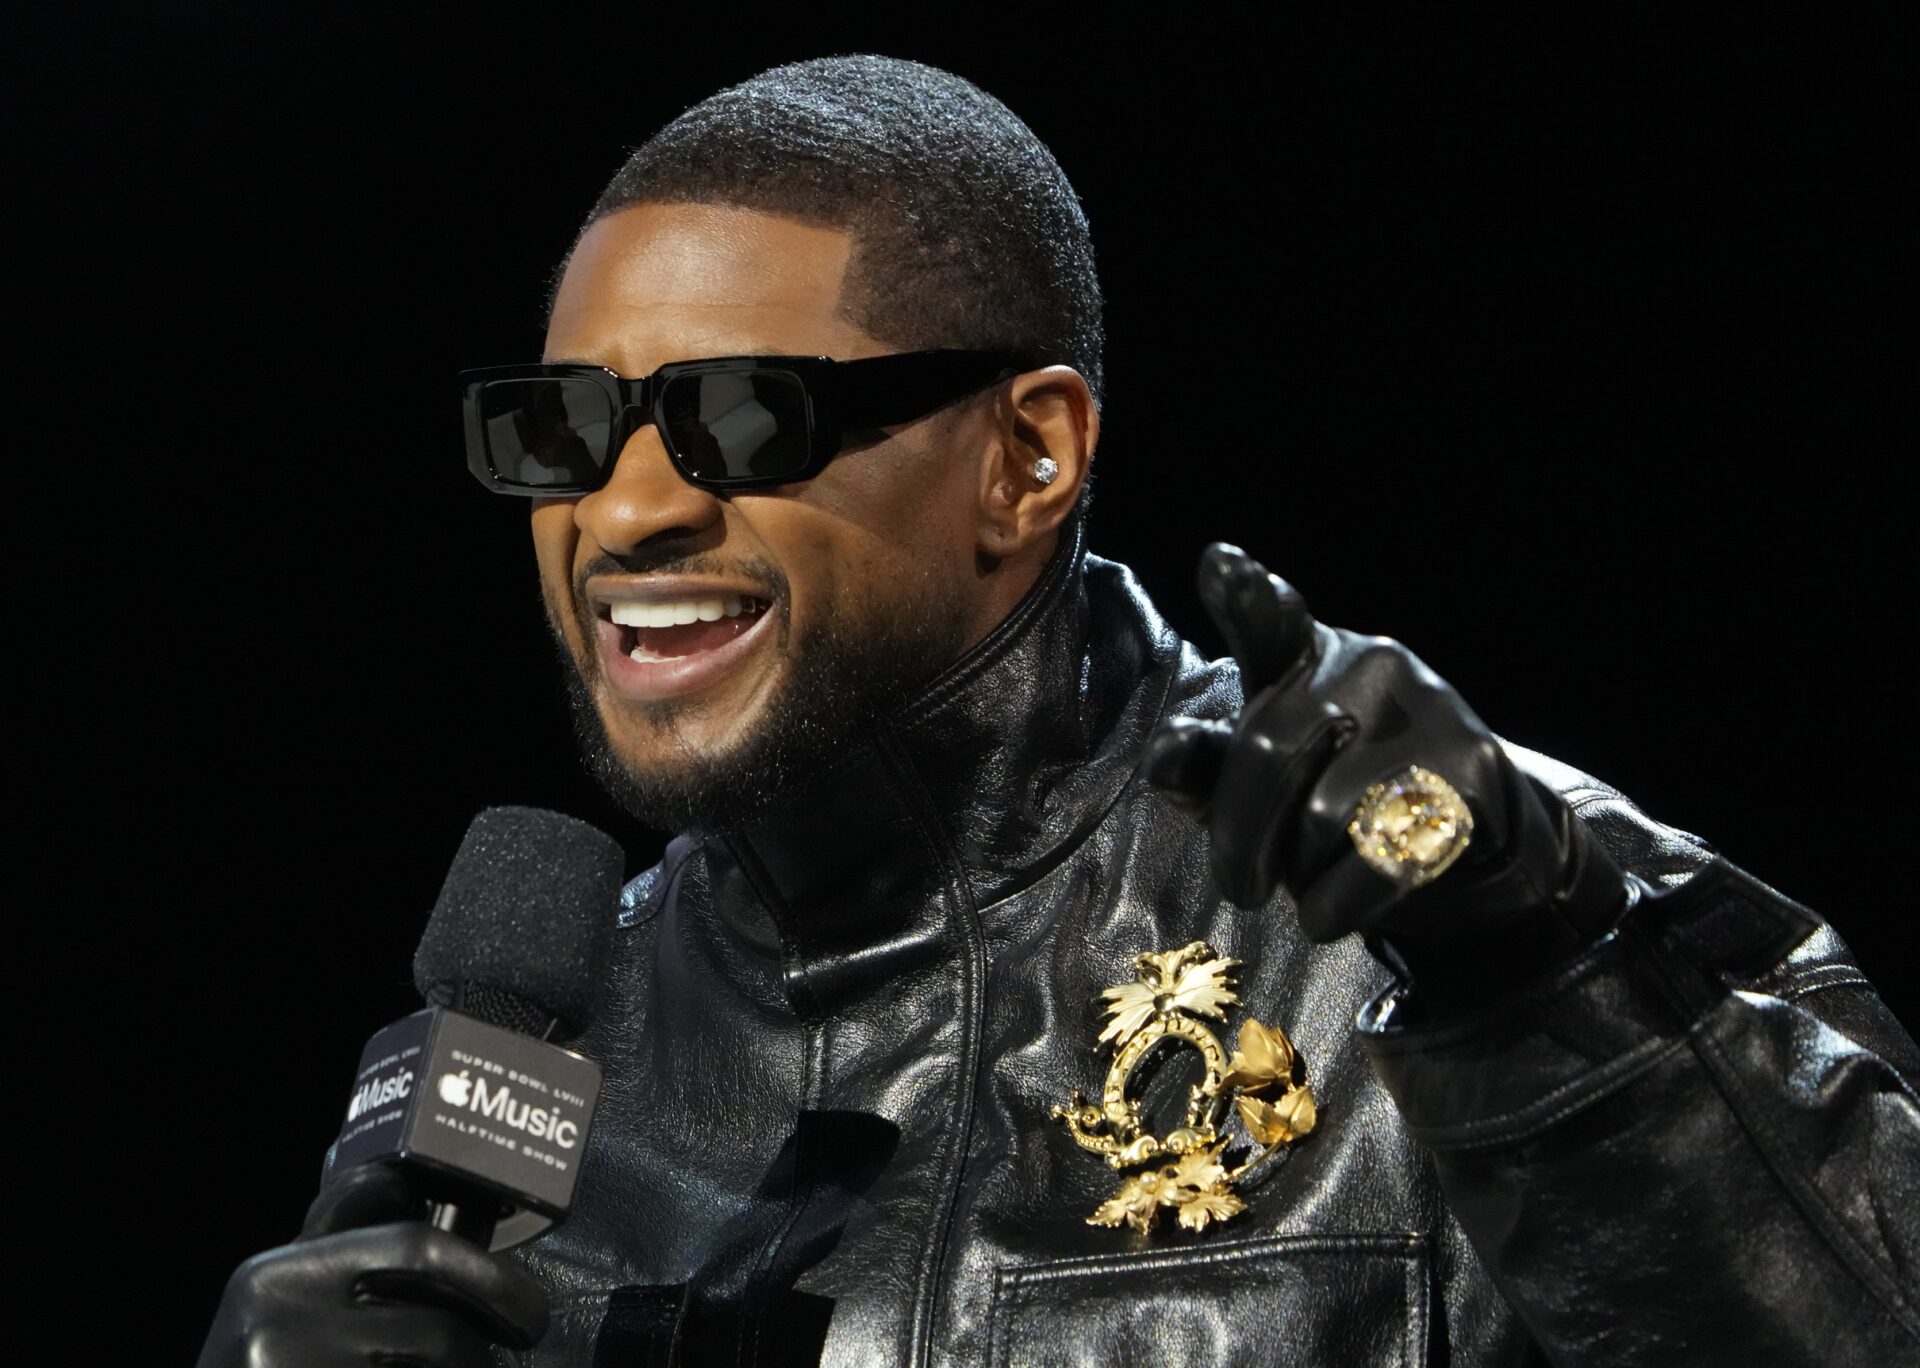 Recording artist Usher during the Super Bowl LVIII pregame and halftime show press conference at the Mandalay Bay Convention Center.